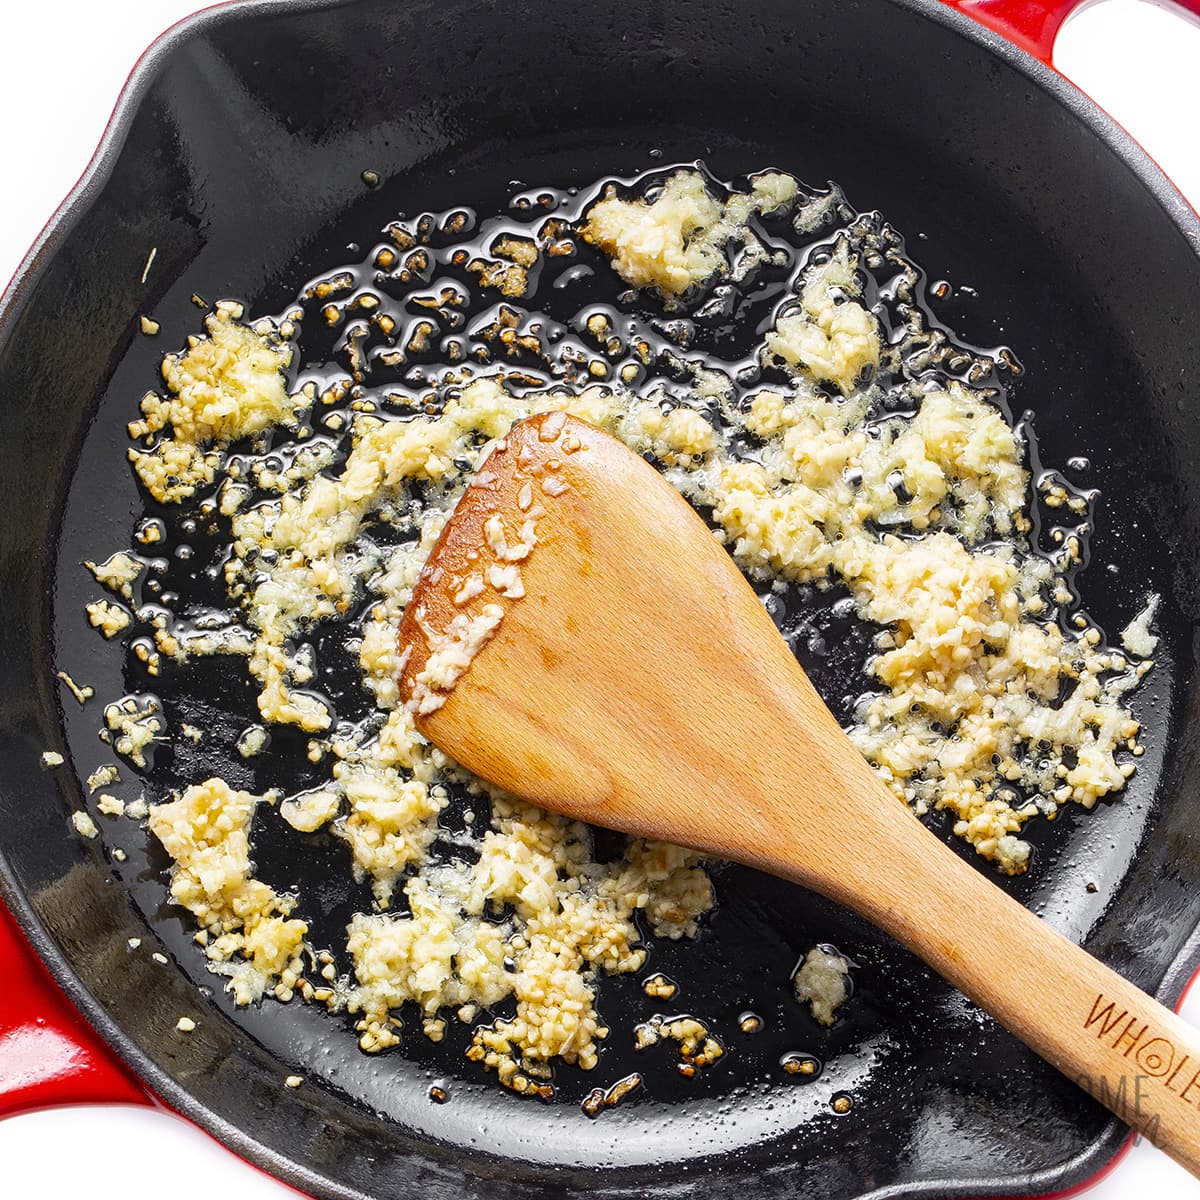 Garlic and ginger in a skillet.